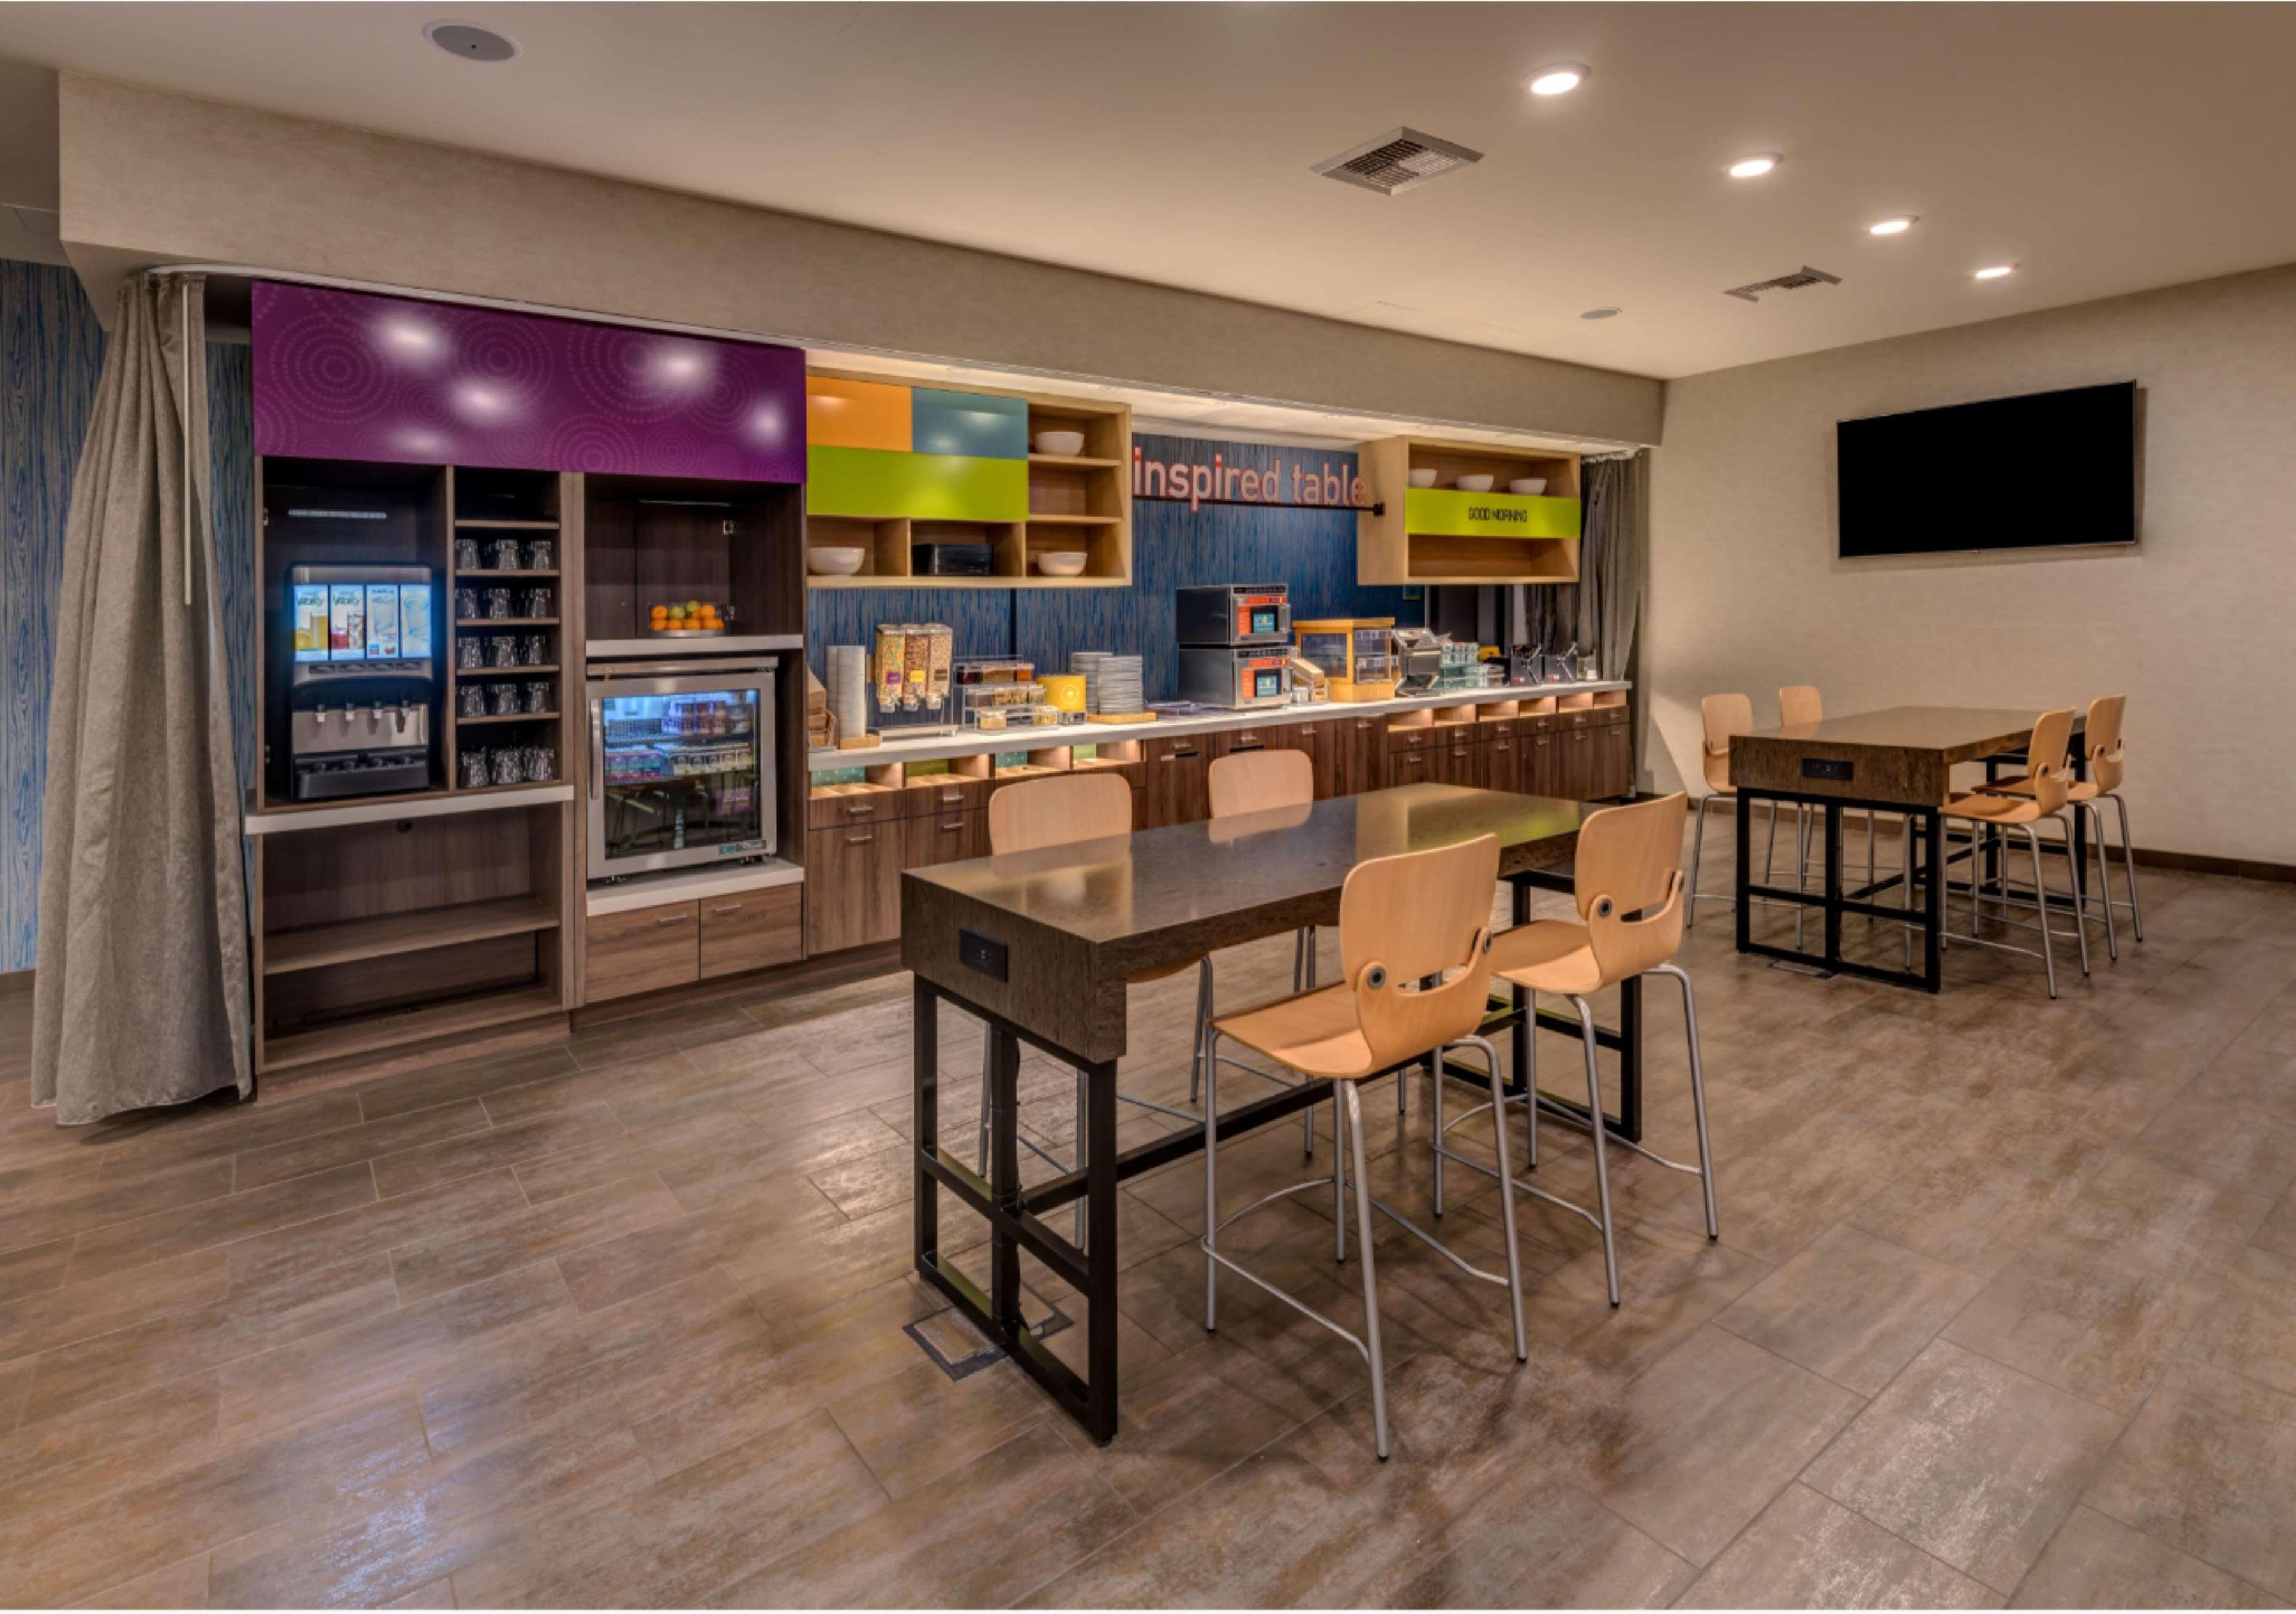 Home2 Suites by Hilton Reno, NV